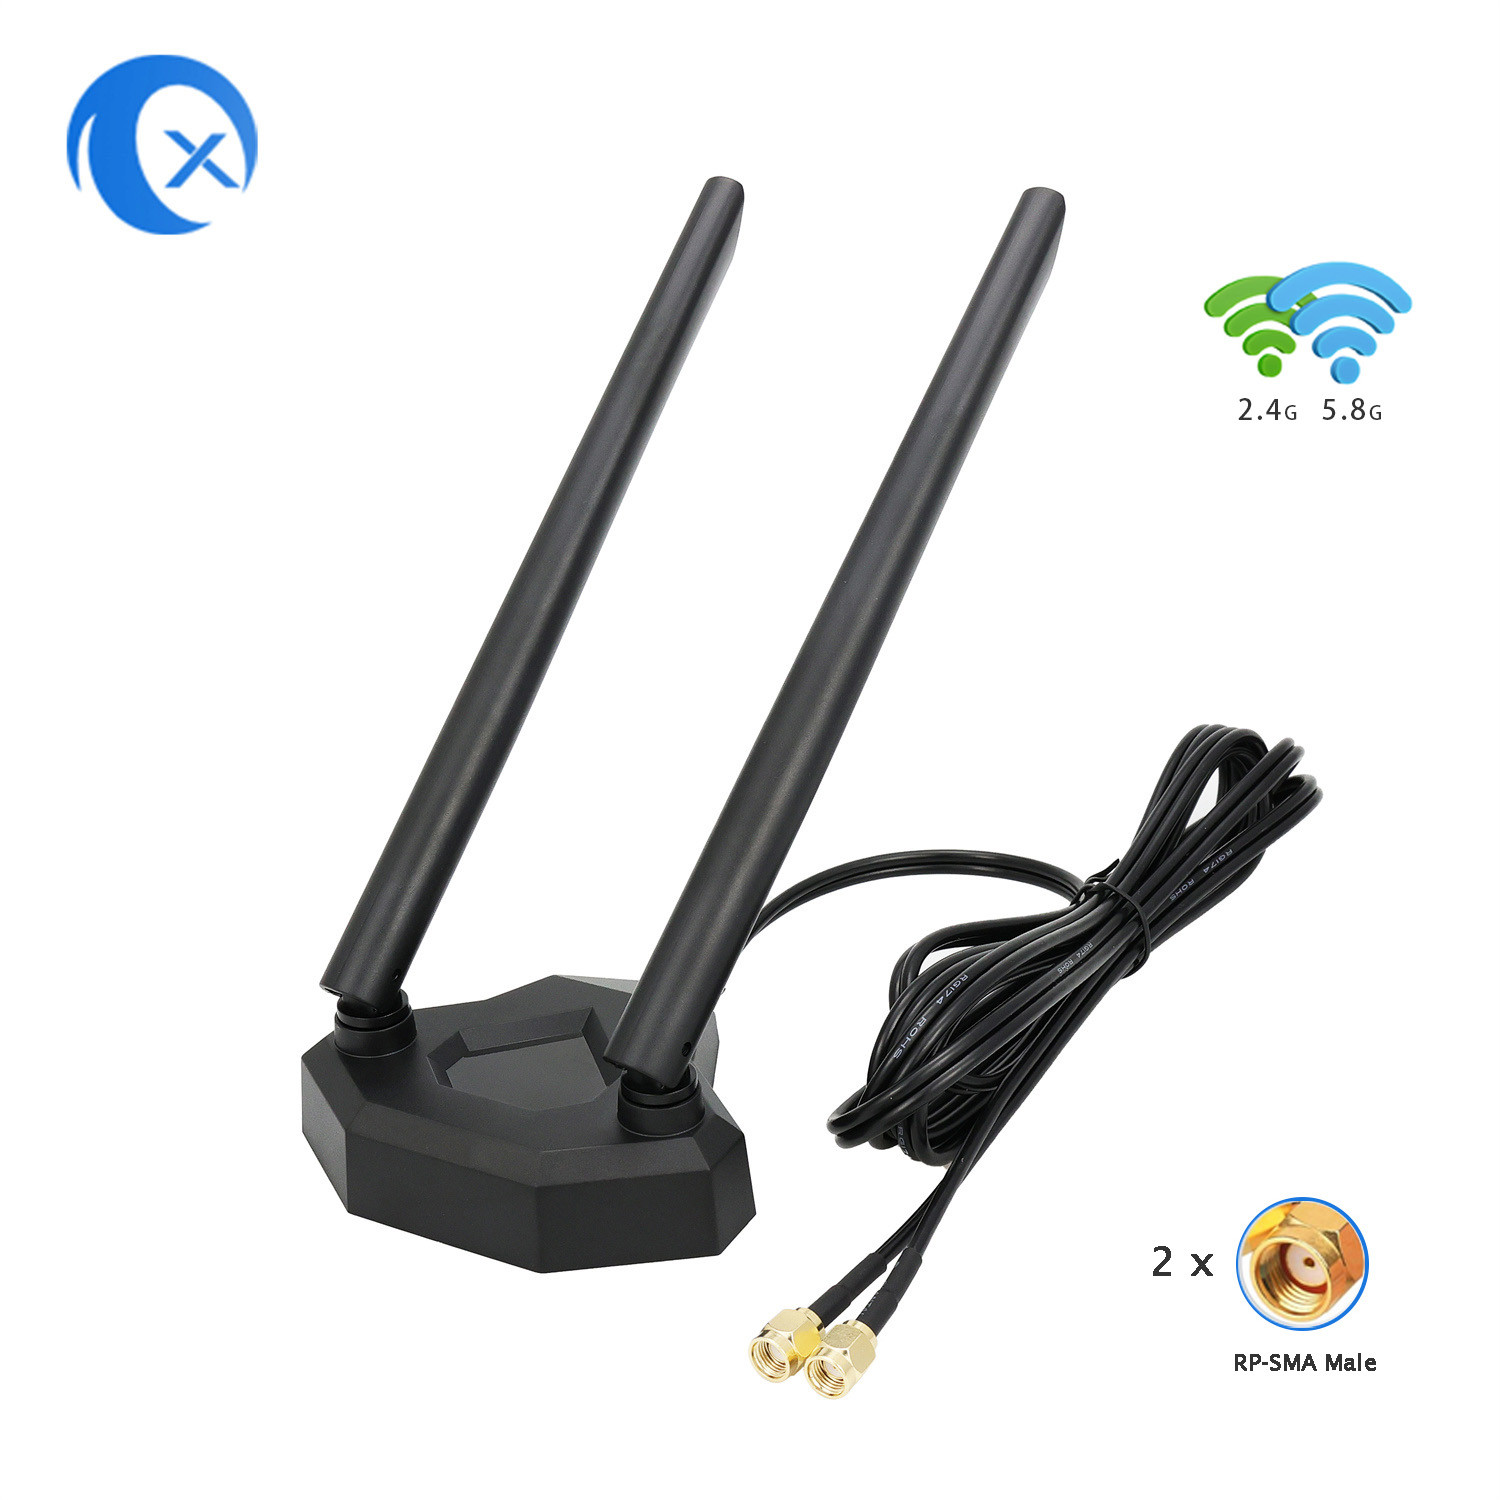 Buy cheap 2.4GHz 5GHz Dual Band Antenna Magnetic Base for PCI-E WiFi Network Card Wireless Router from wholesalers